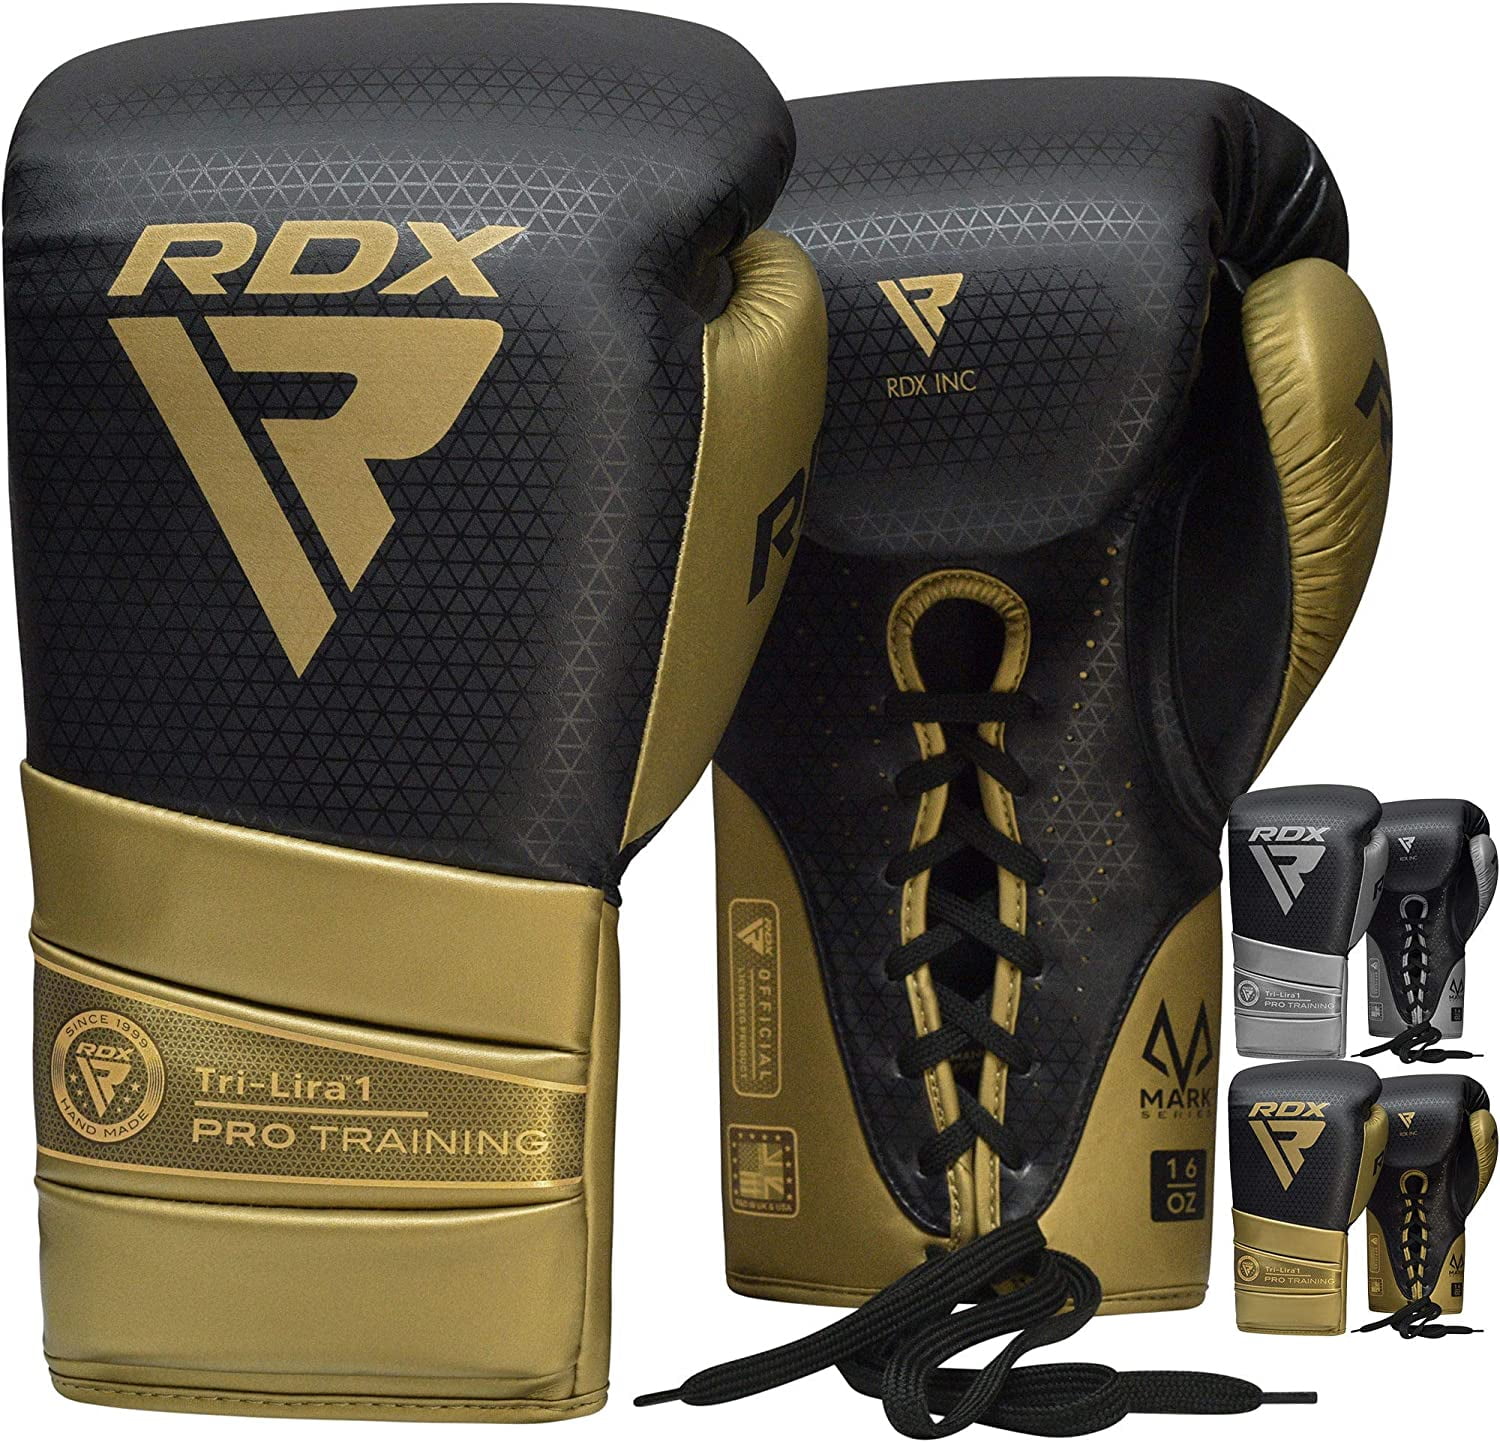 Blade® Leather MMA Martial Arts Gloves Training Boxing Body Combat Punch Bag 